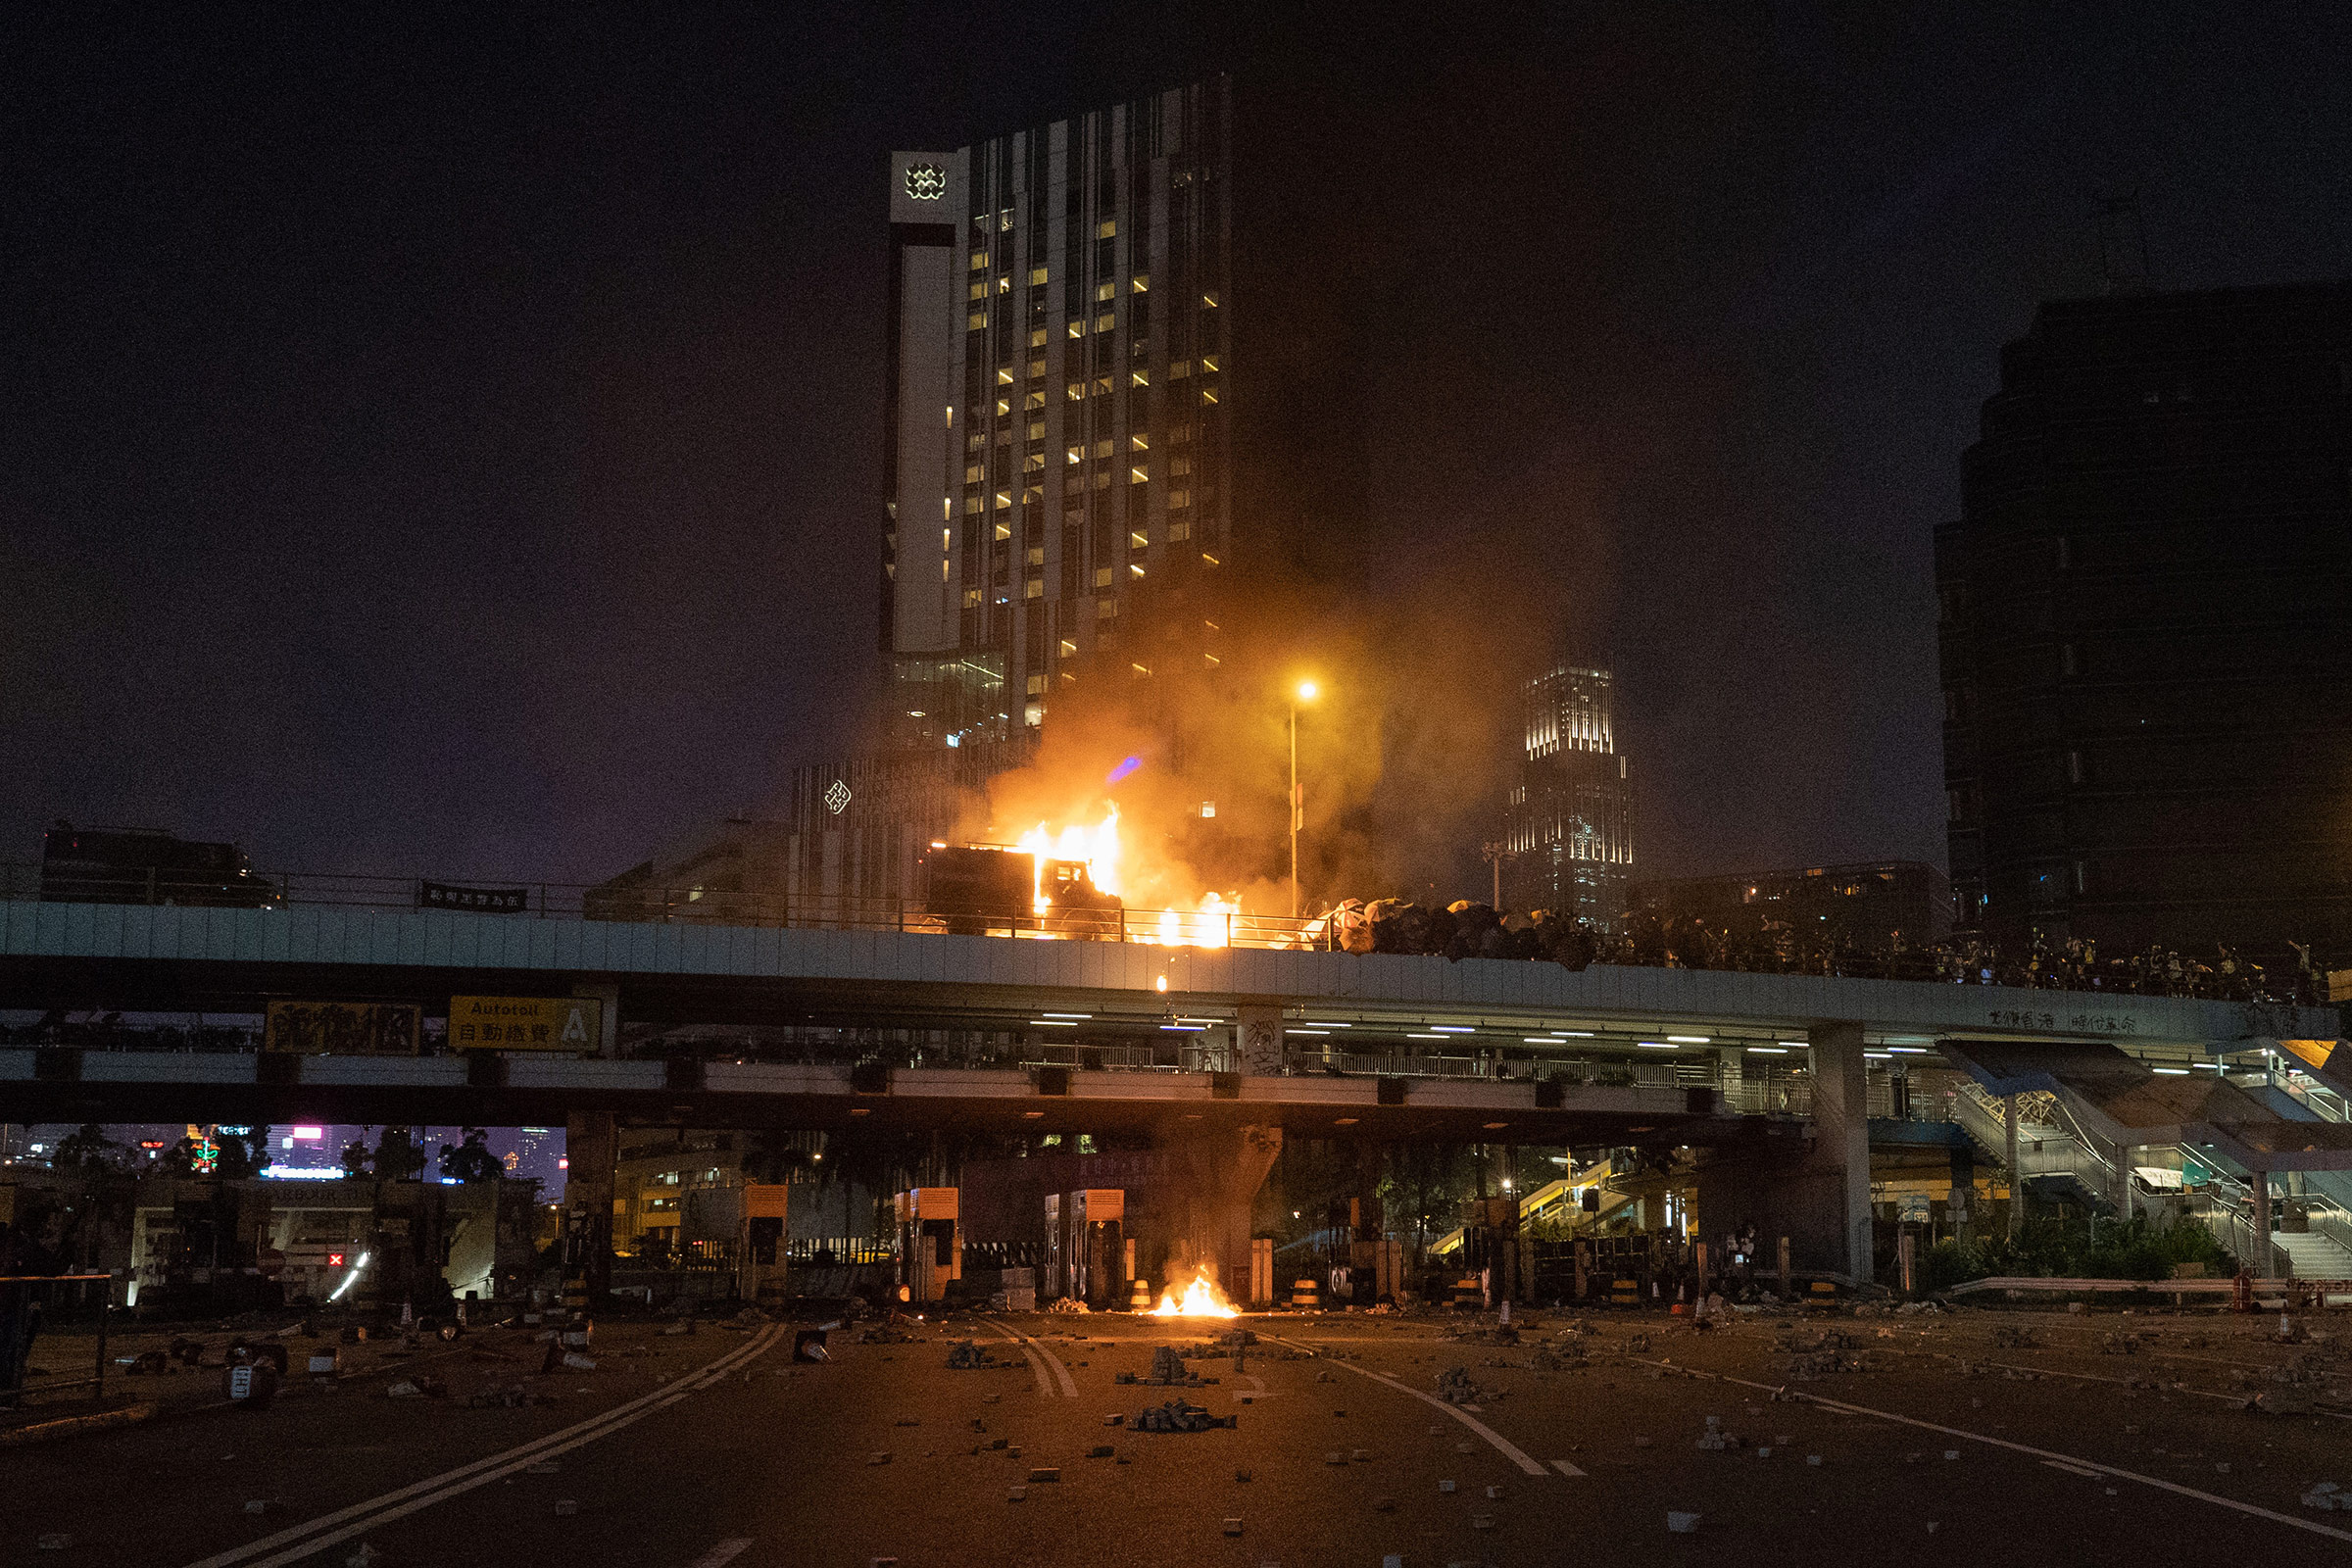 An armored police van is engulfed in flames on a bridge overlooking the Cross-Harbour Tunnel, Nov. 17, 2019.